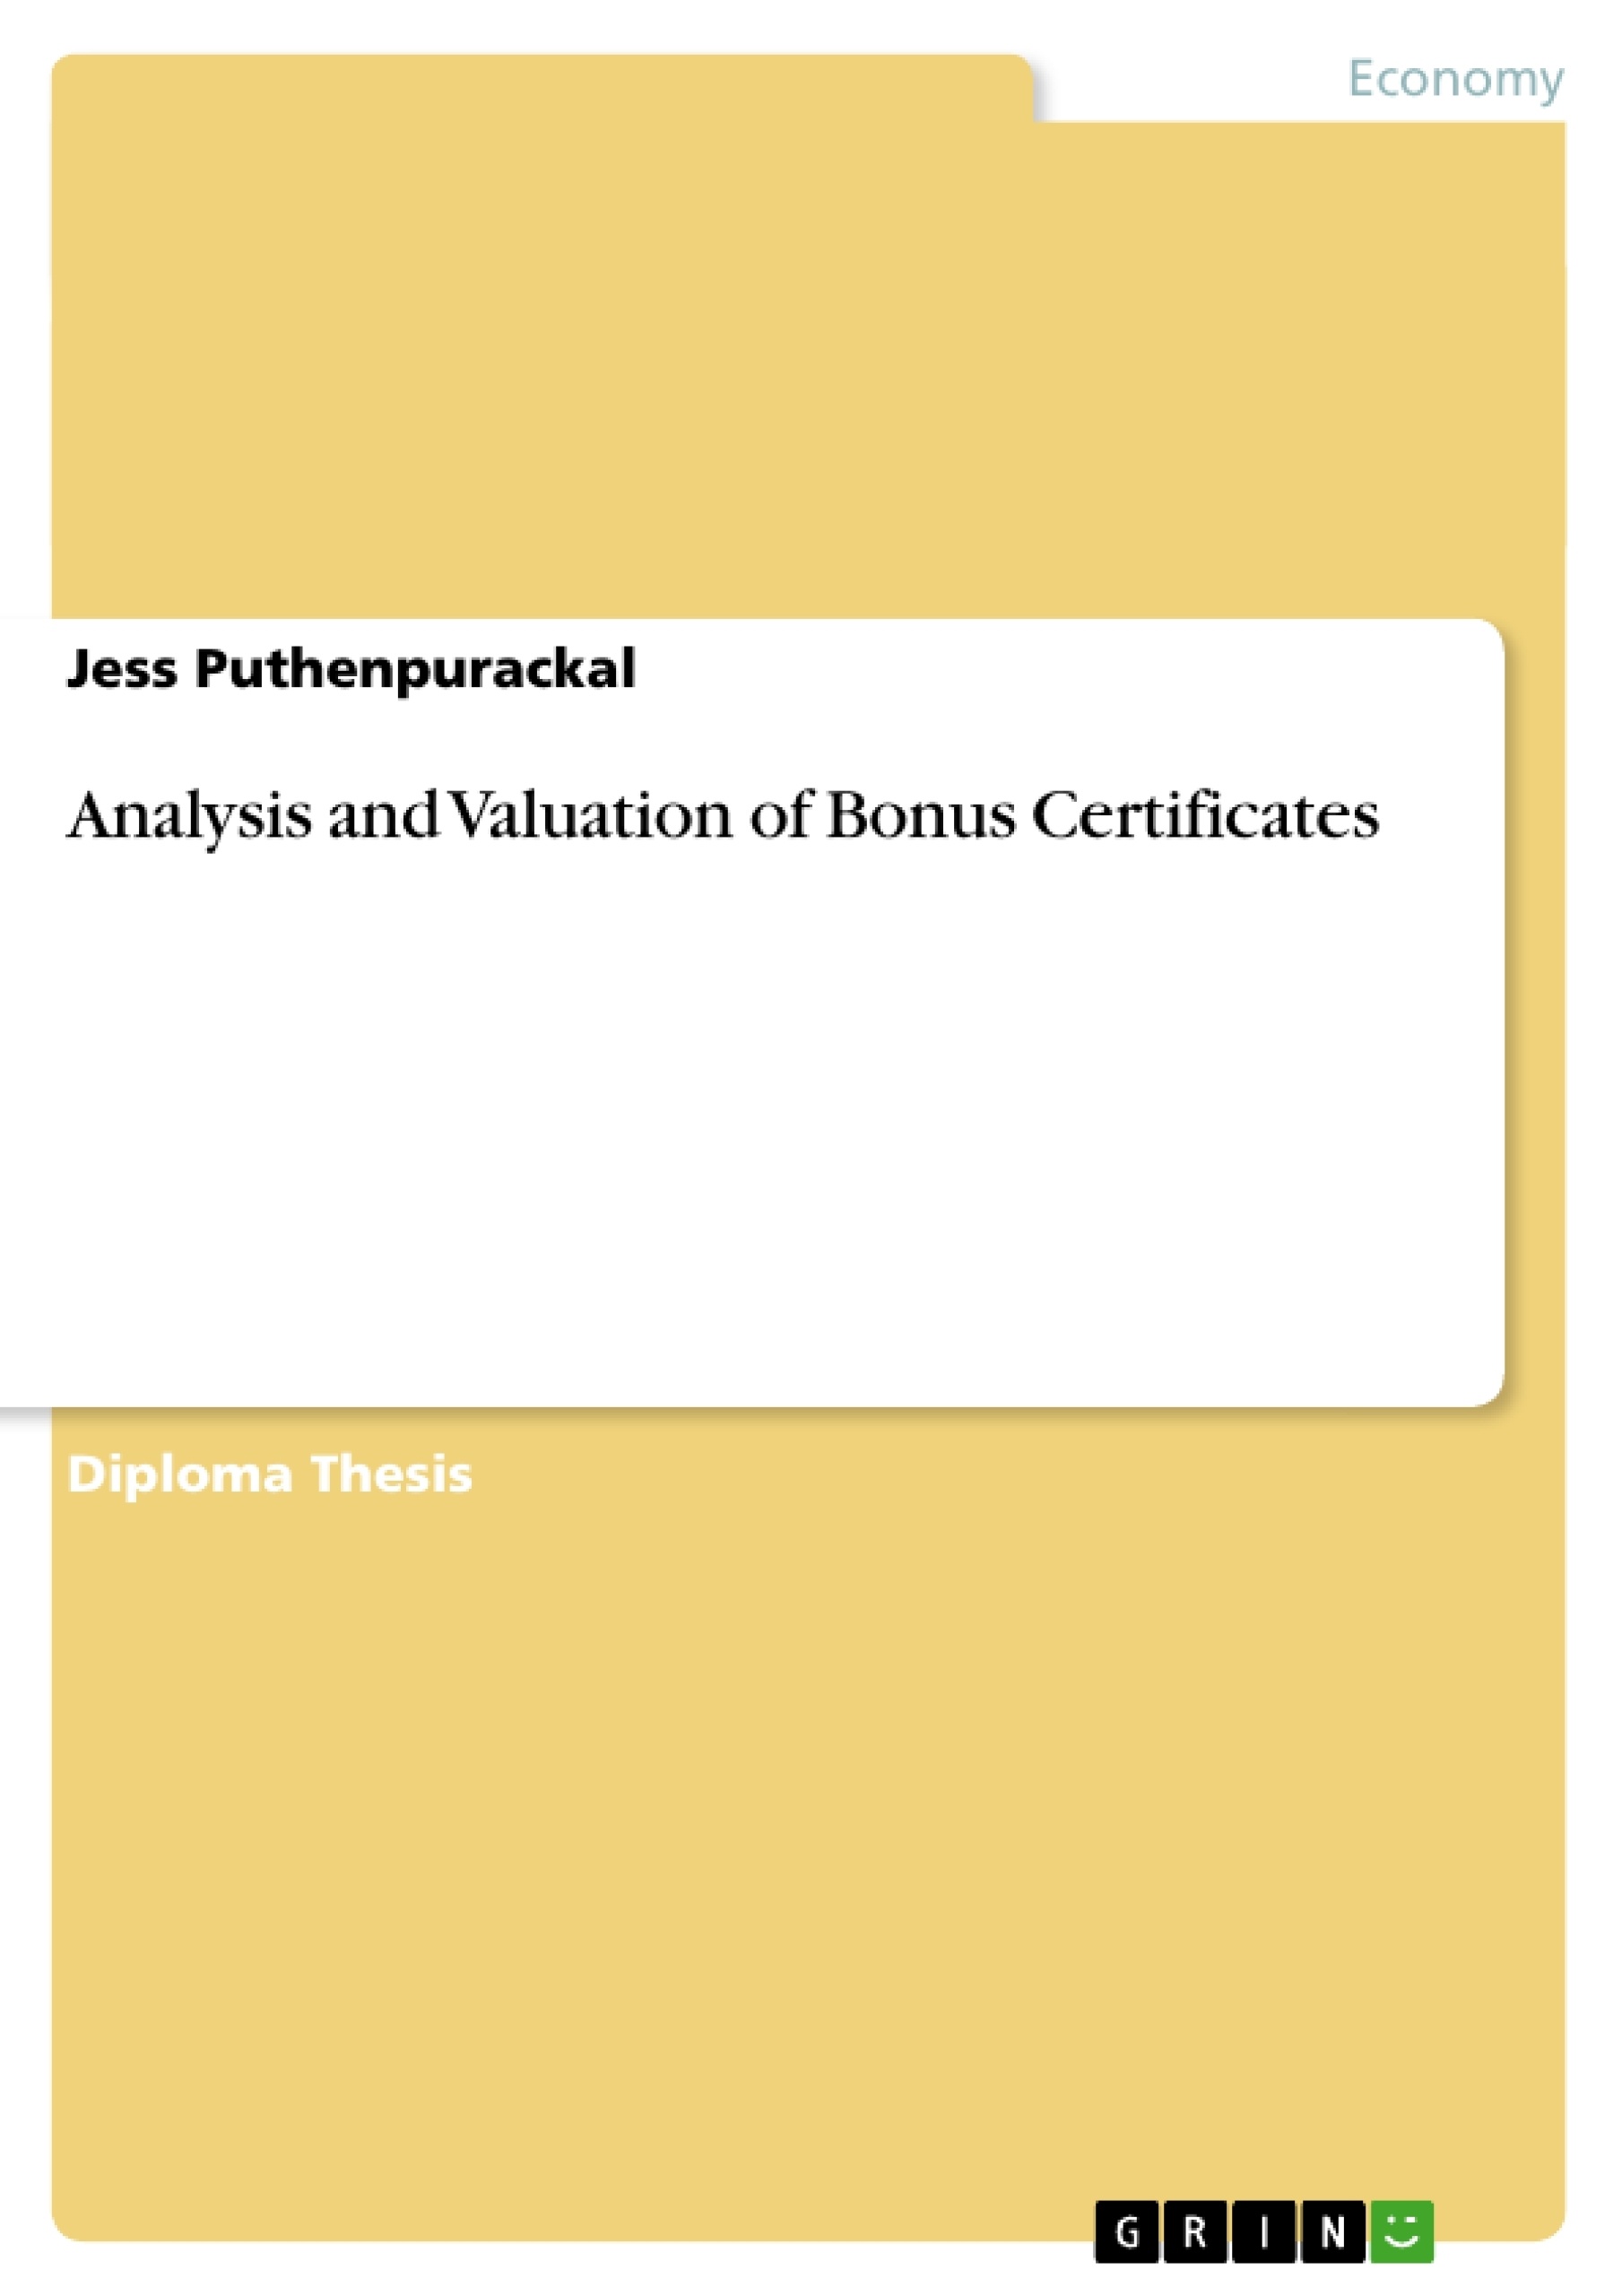 Title: Analysis and Valuation of Bonus Certificates